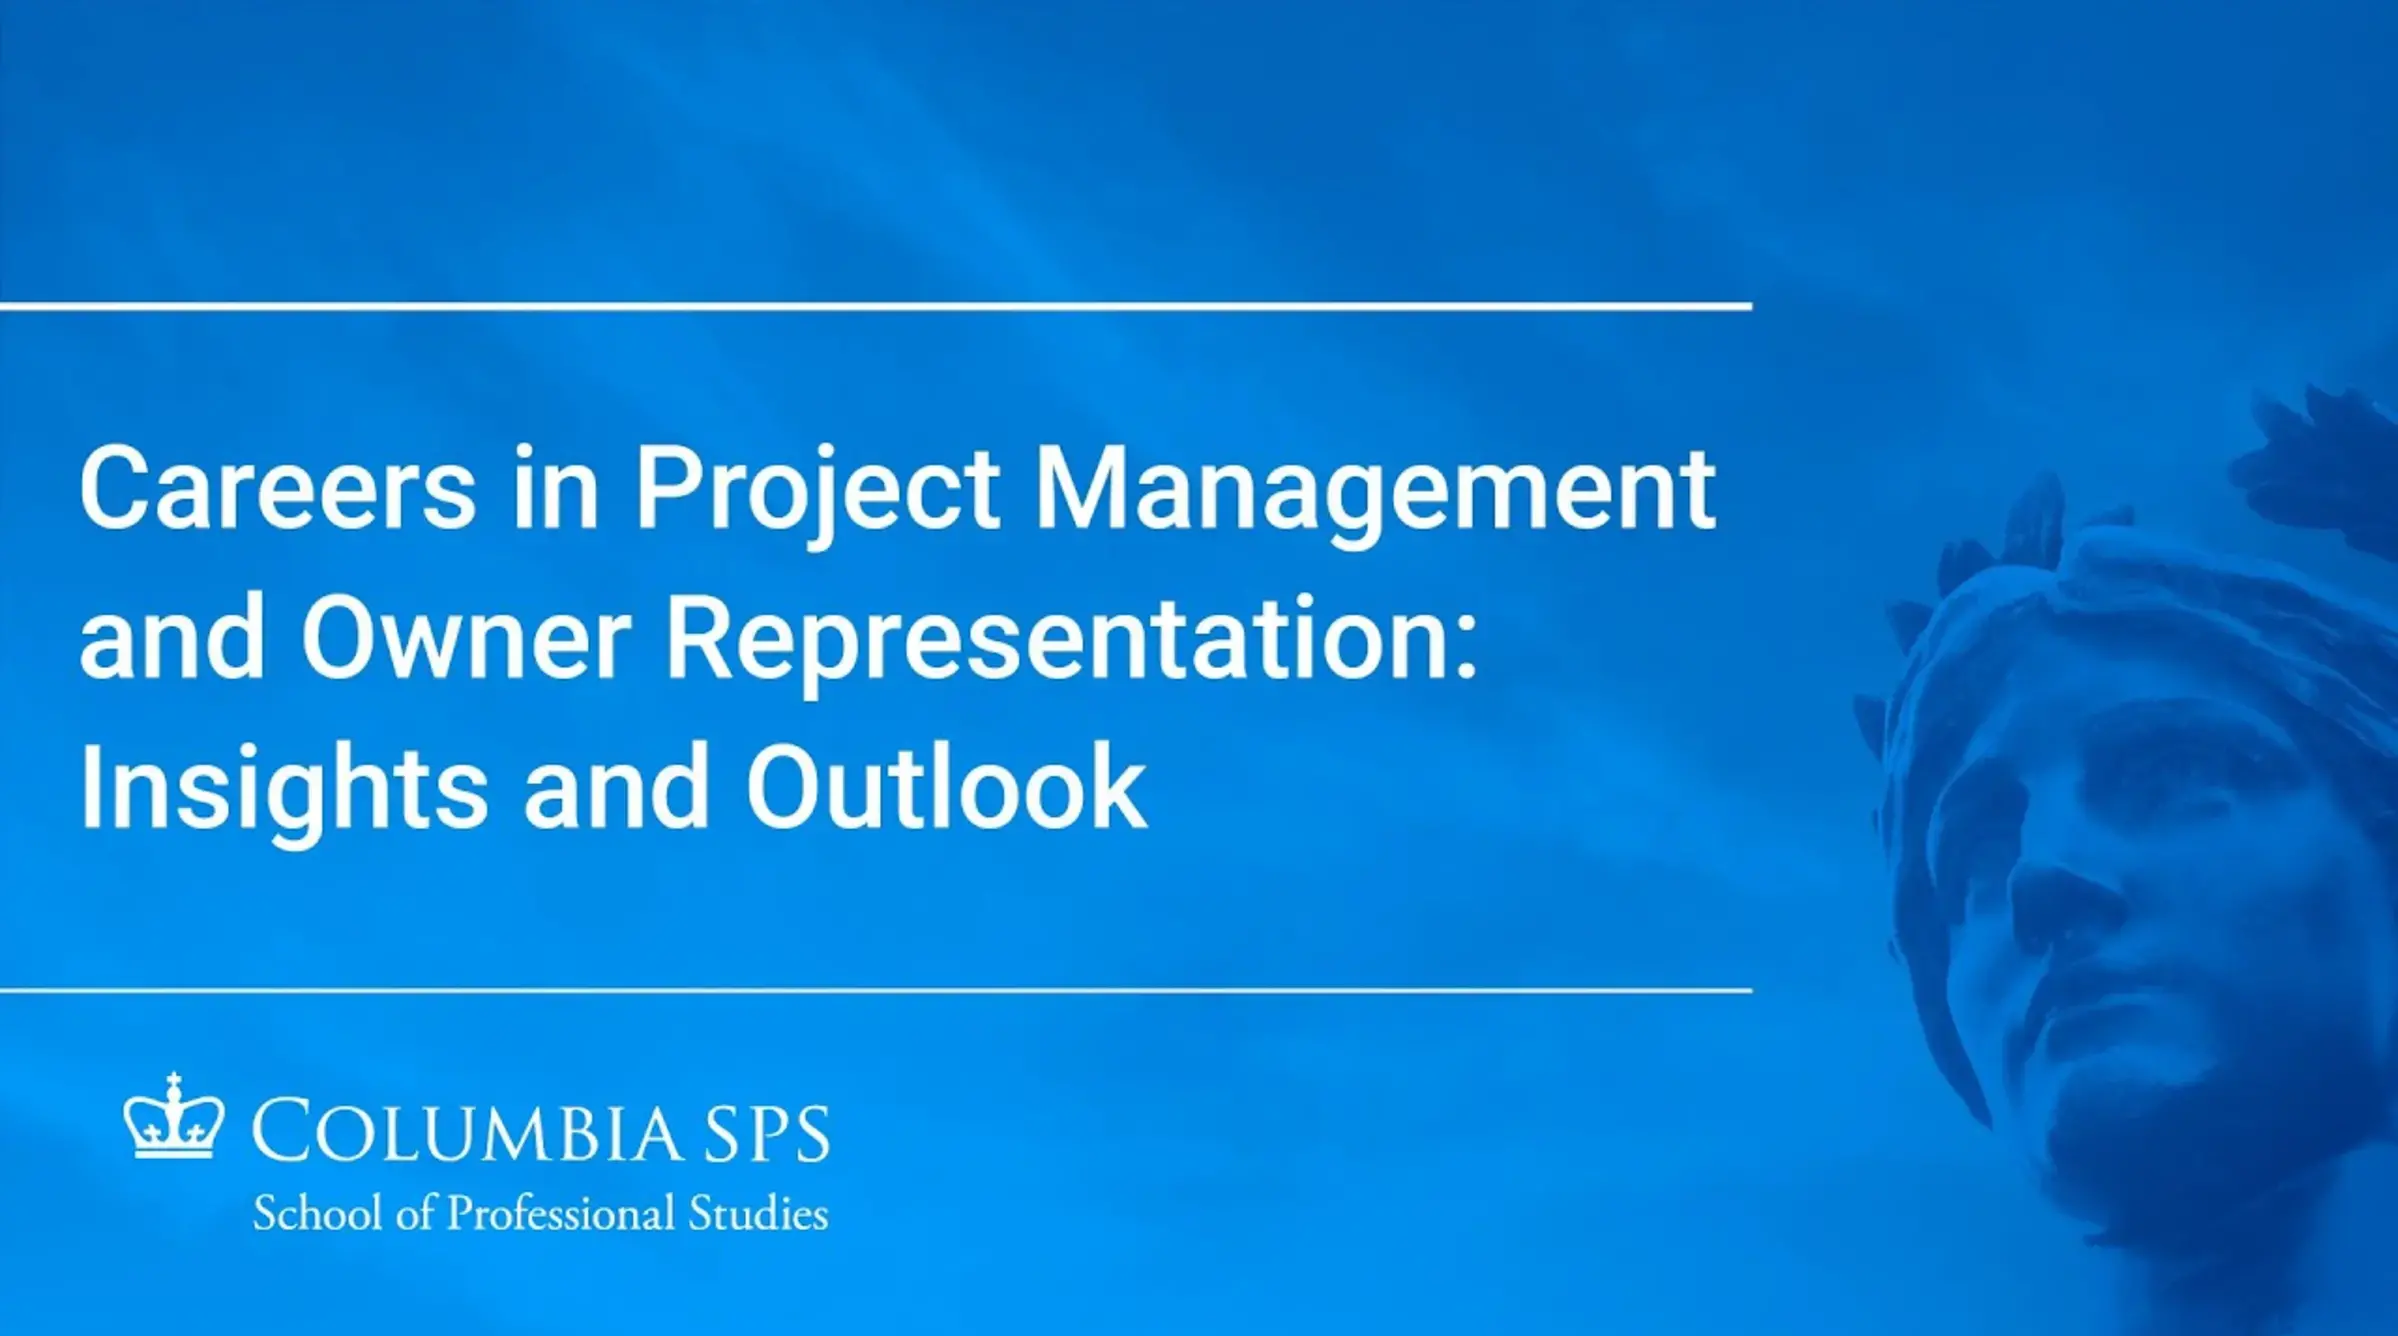 Careers in Project Management and Owner Representation: Insights and Outlook